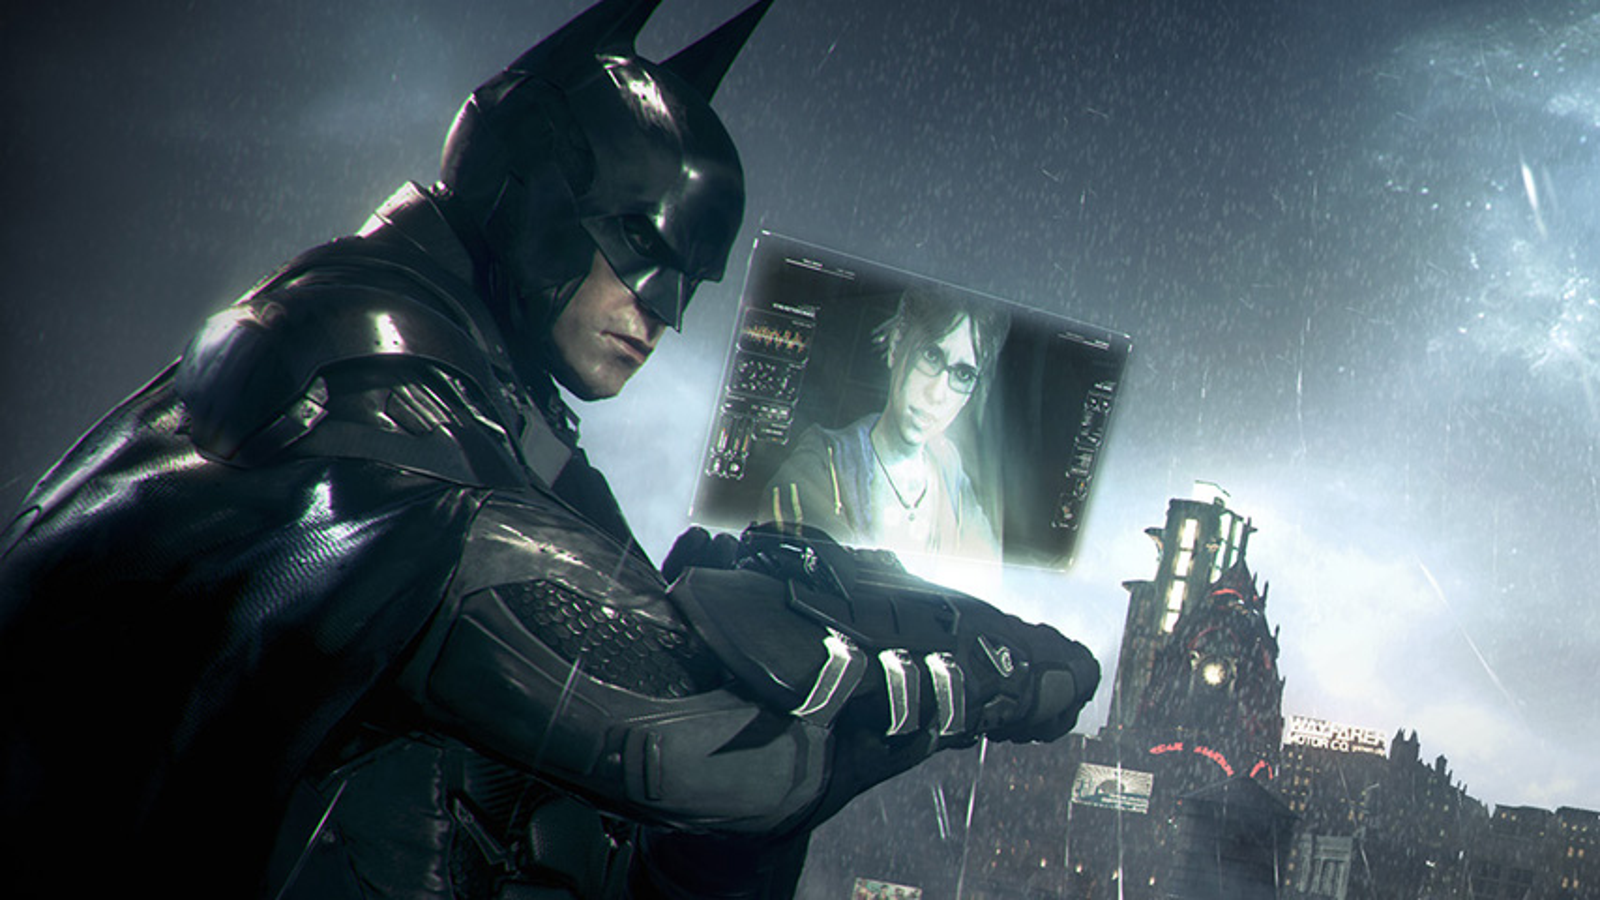 Batman: Arkham Knight gets new PC patch to improve VRAM issues | VG247